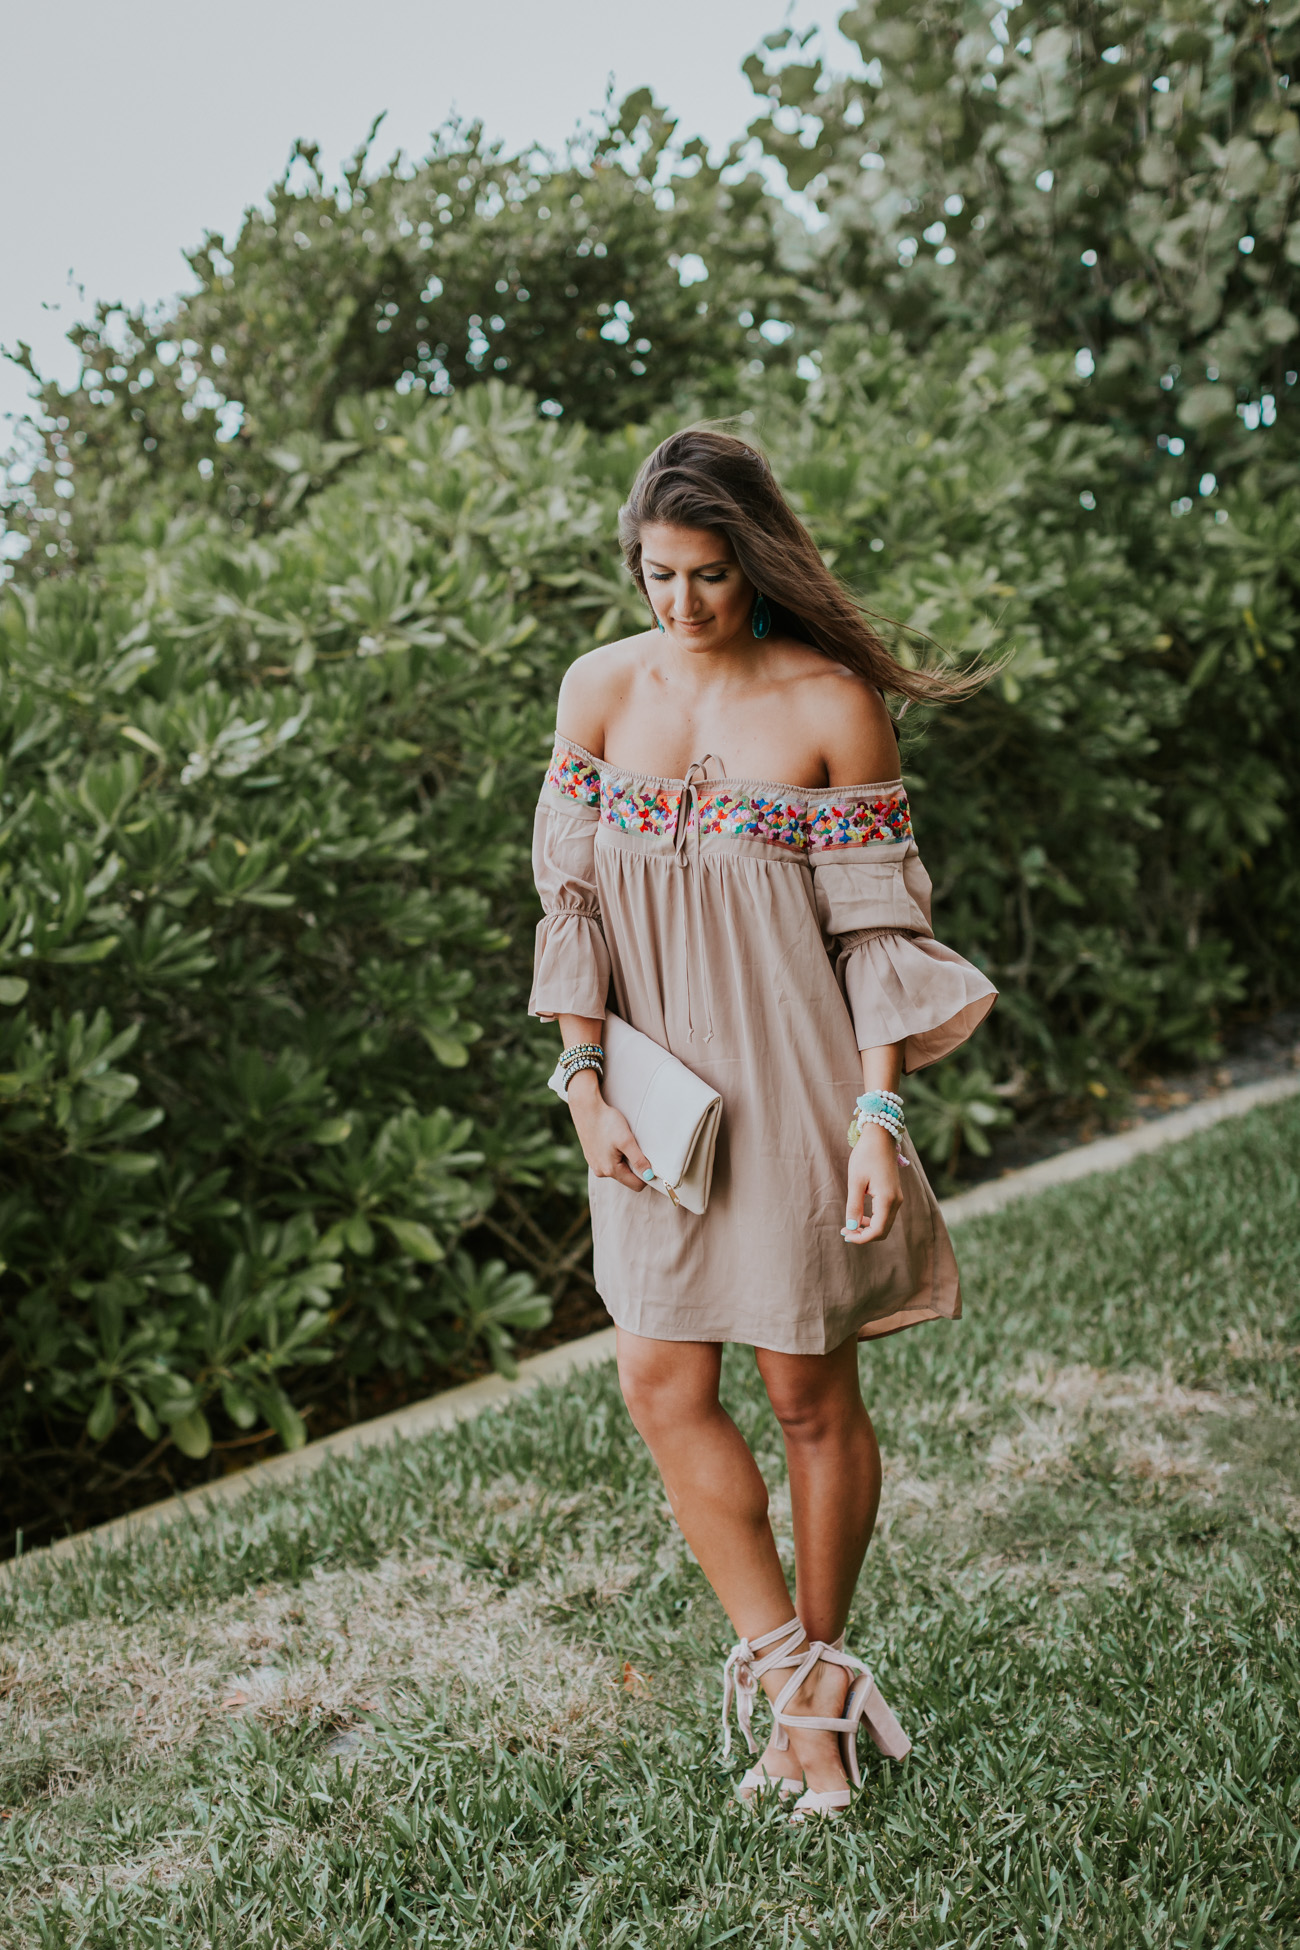 embroidered off the shoulder dress, vava by joy han dress, beach style, beach fashion, ruffle sleeves, tassel bracelets, turquoise jewelry // grace wainwright a southern drawl